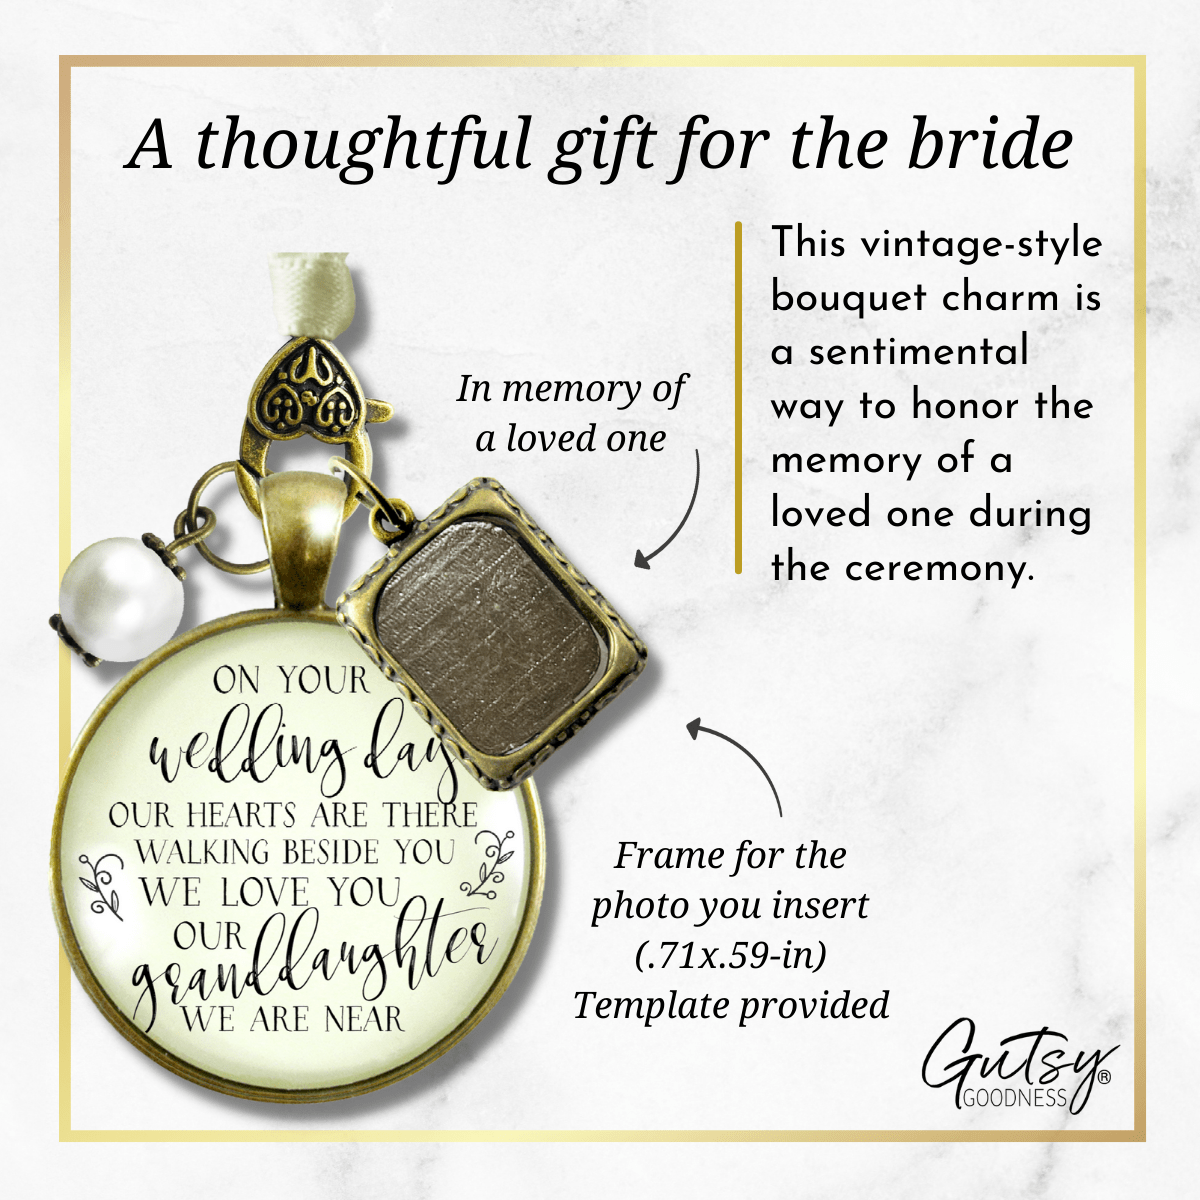 On Your Wedding Day OUR Heart Is There Walking Beside You GRANDDAUGHTER - BRONZE - CREAM - WHITE BEAD